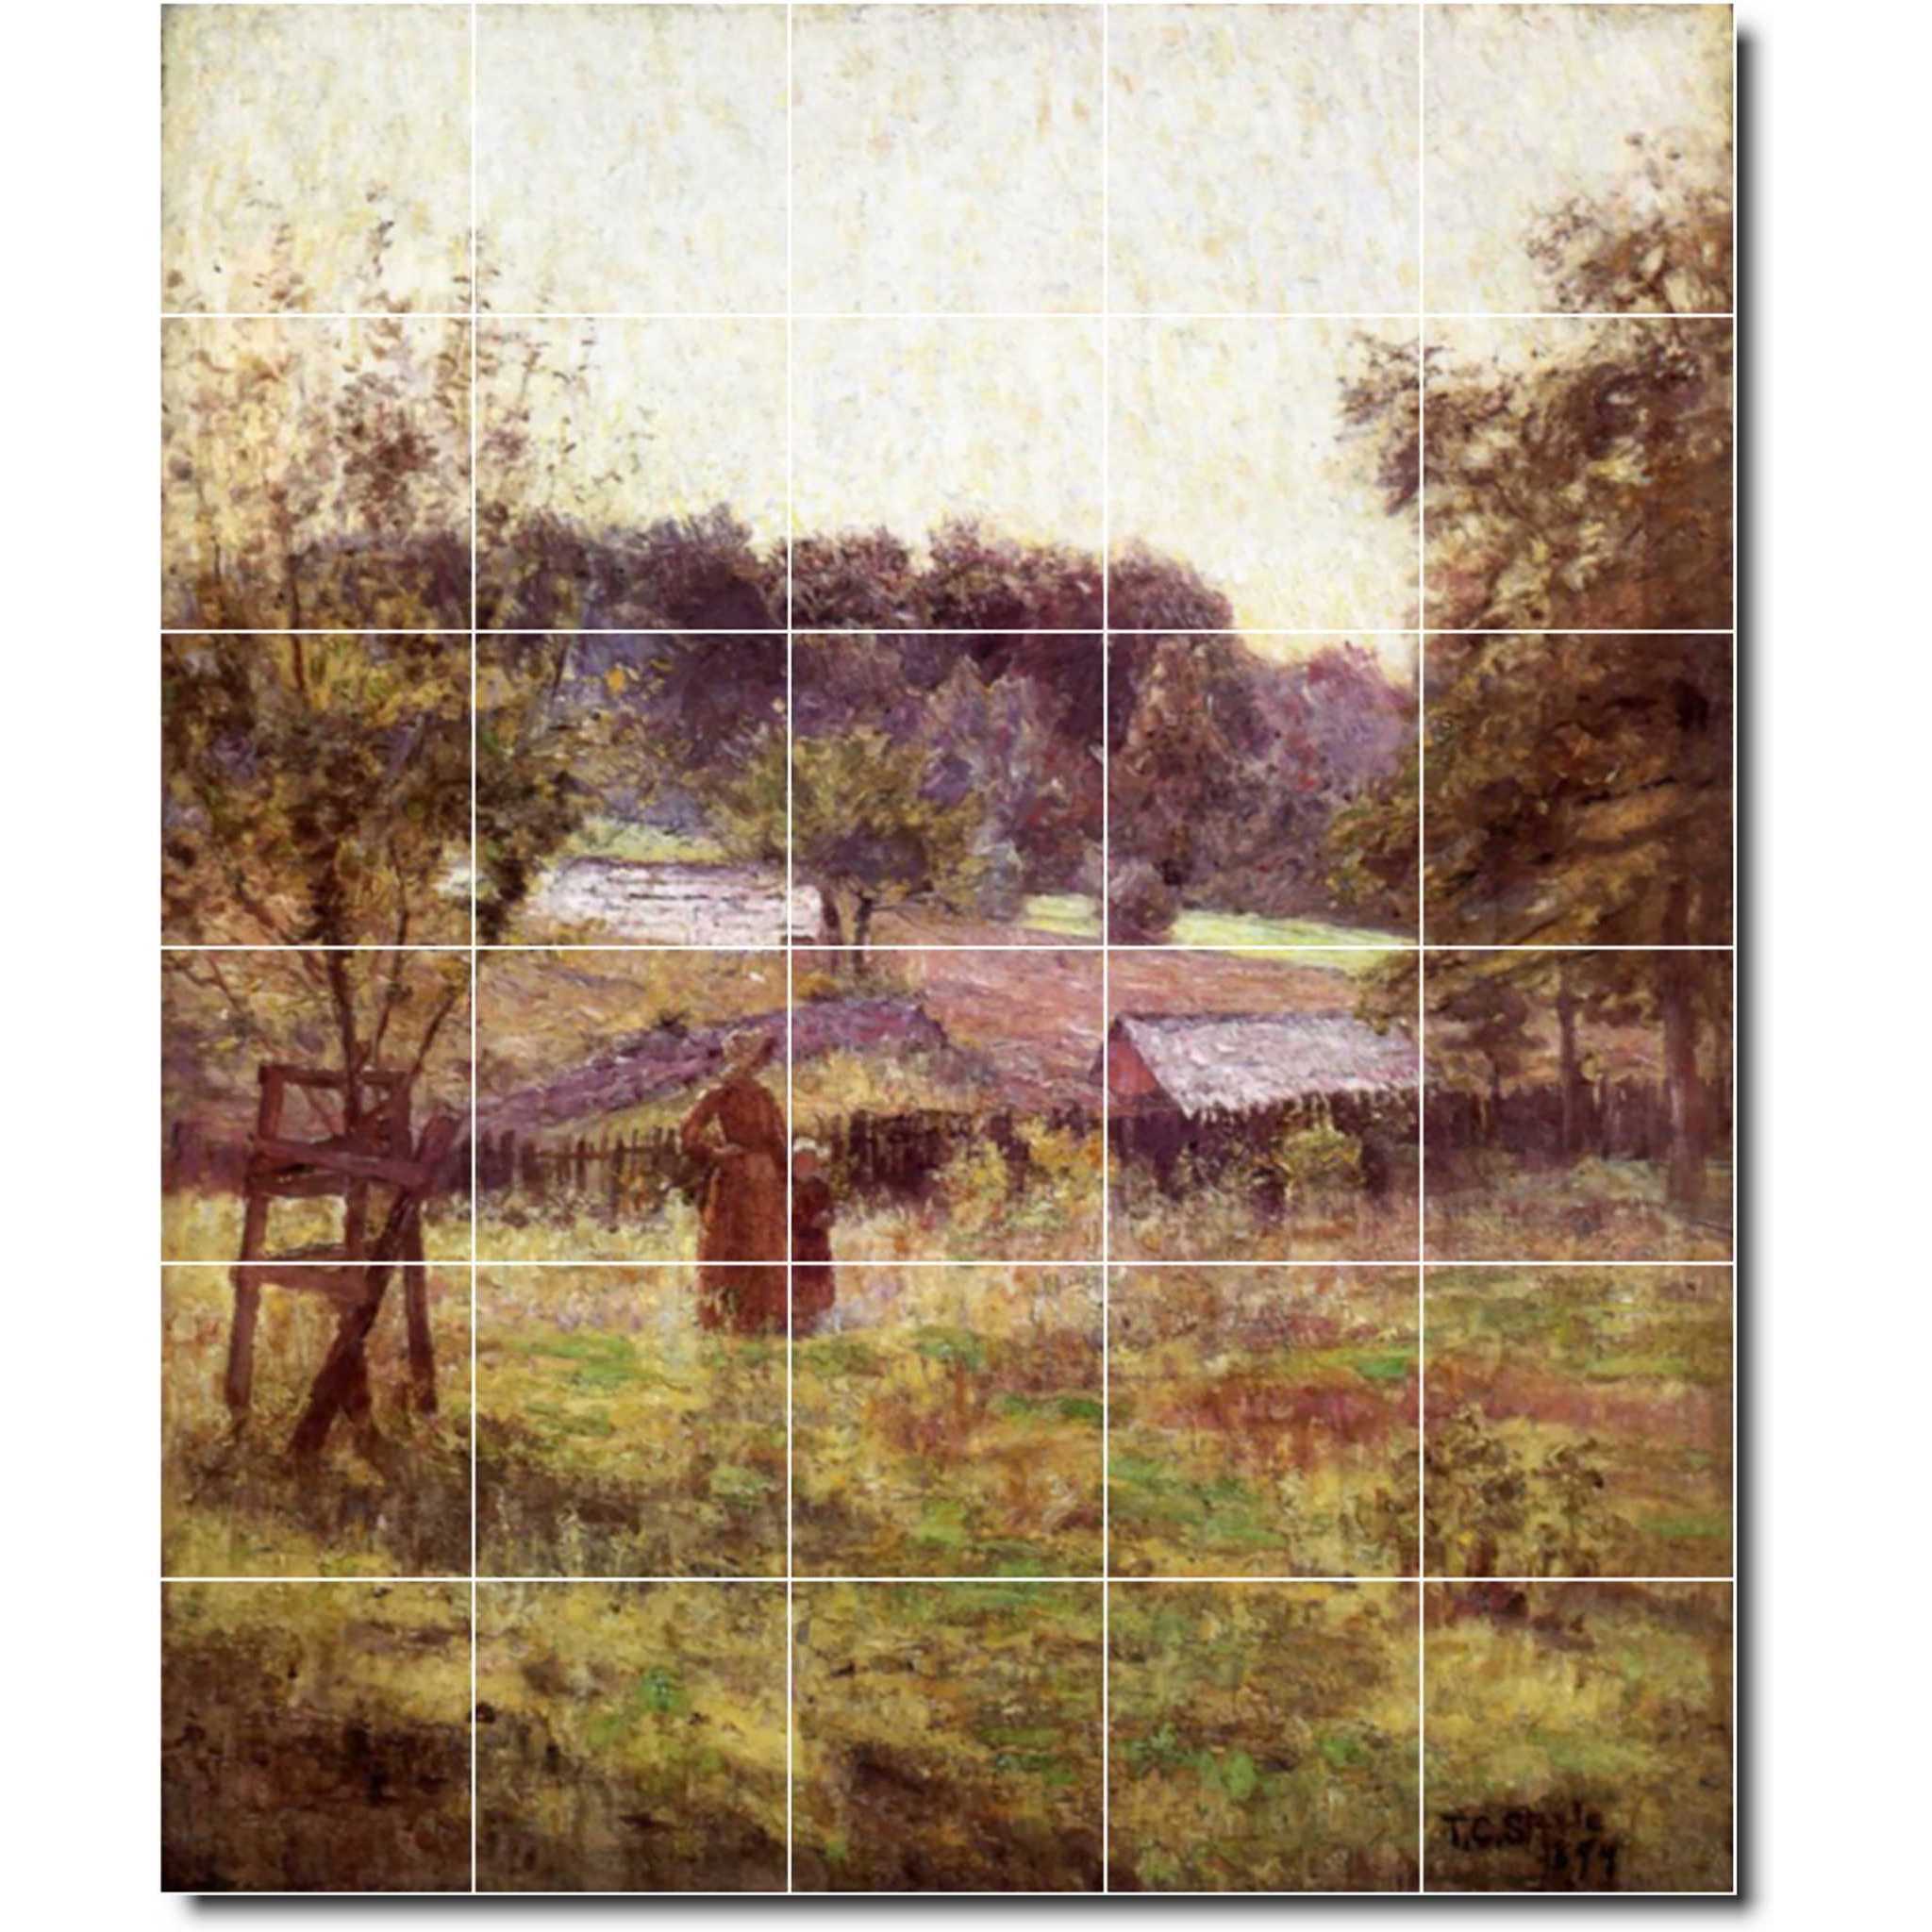 theodore steele country painting ceramic tile mural p08361